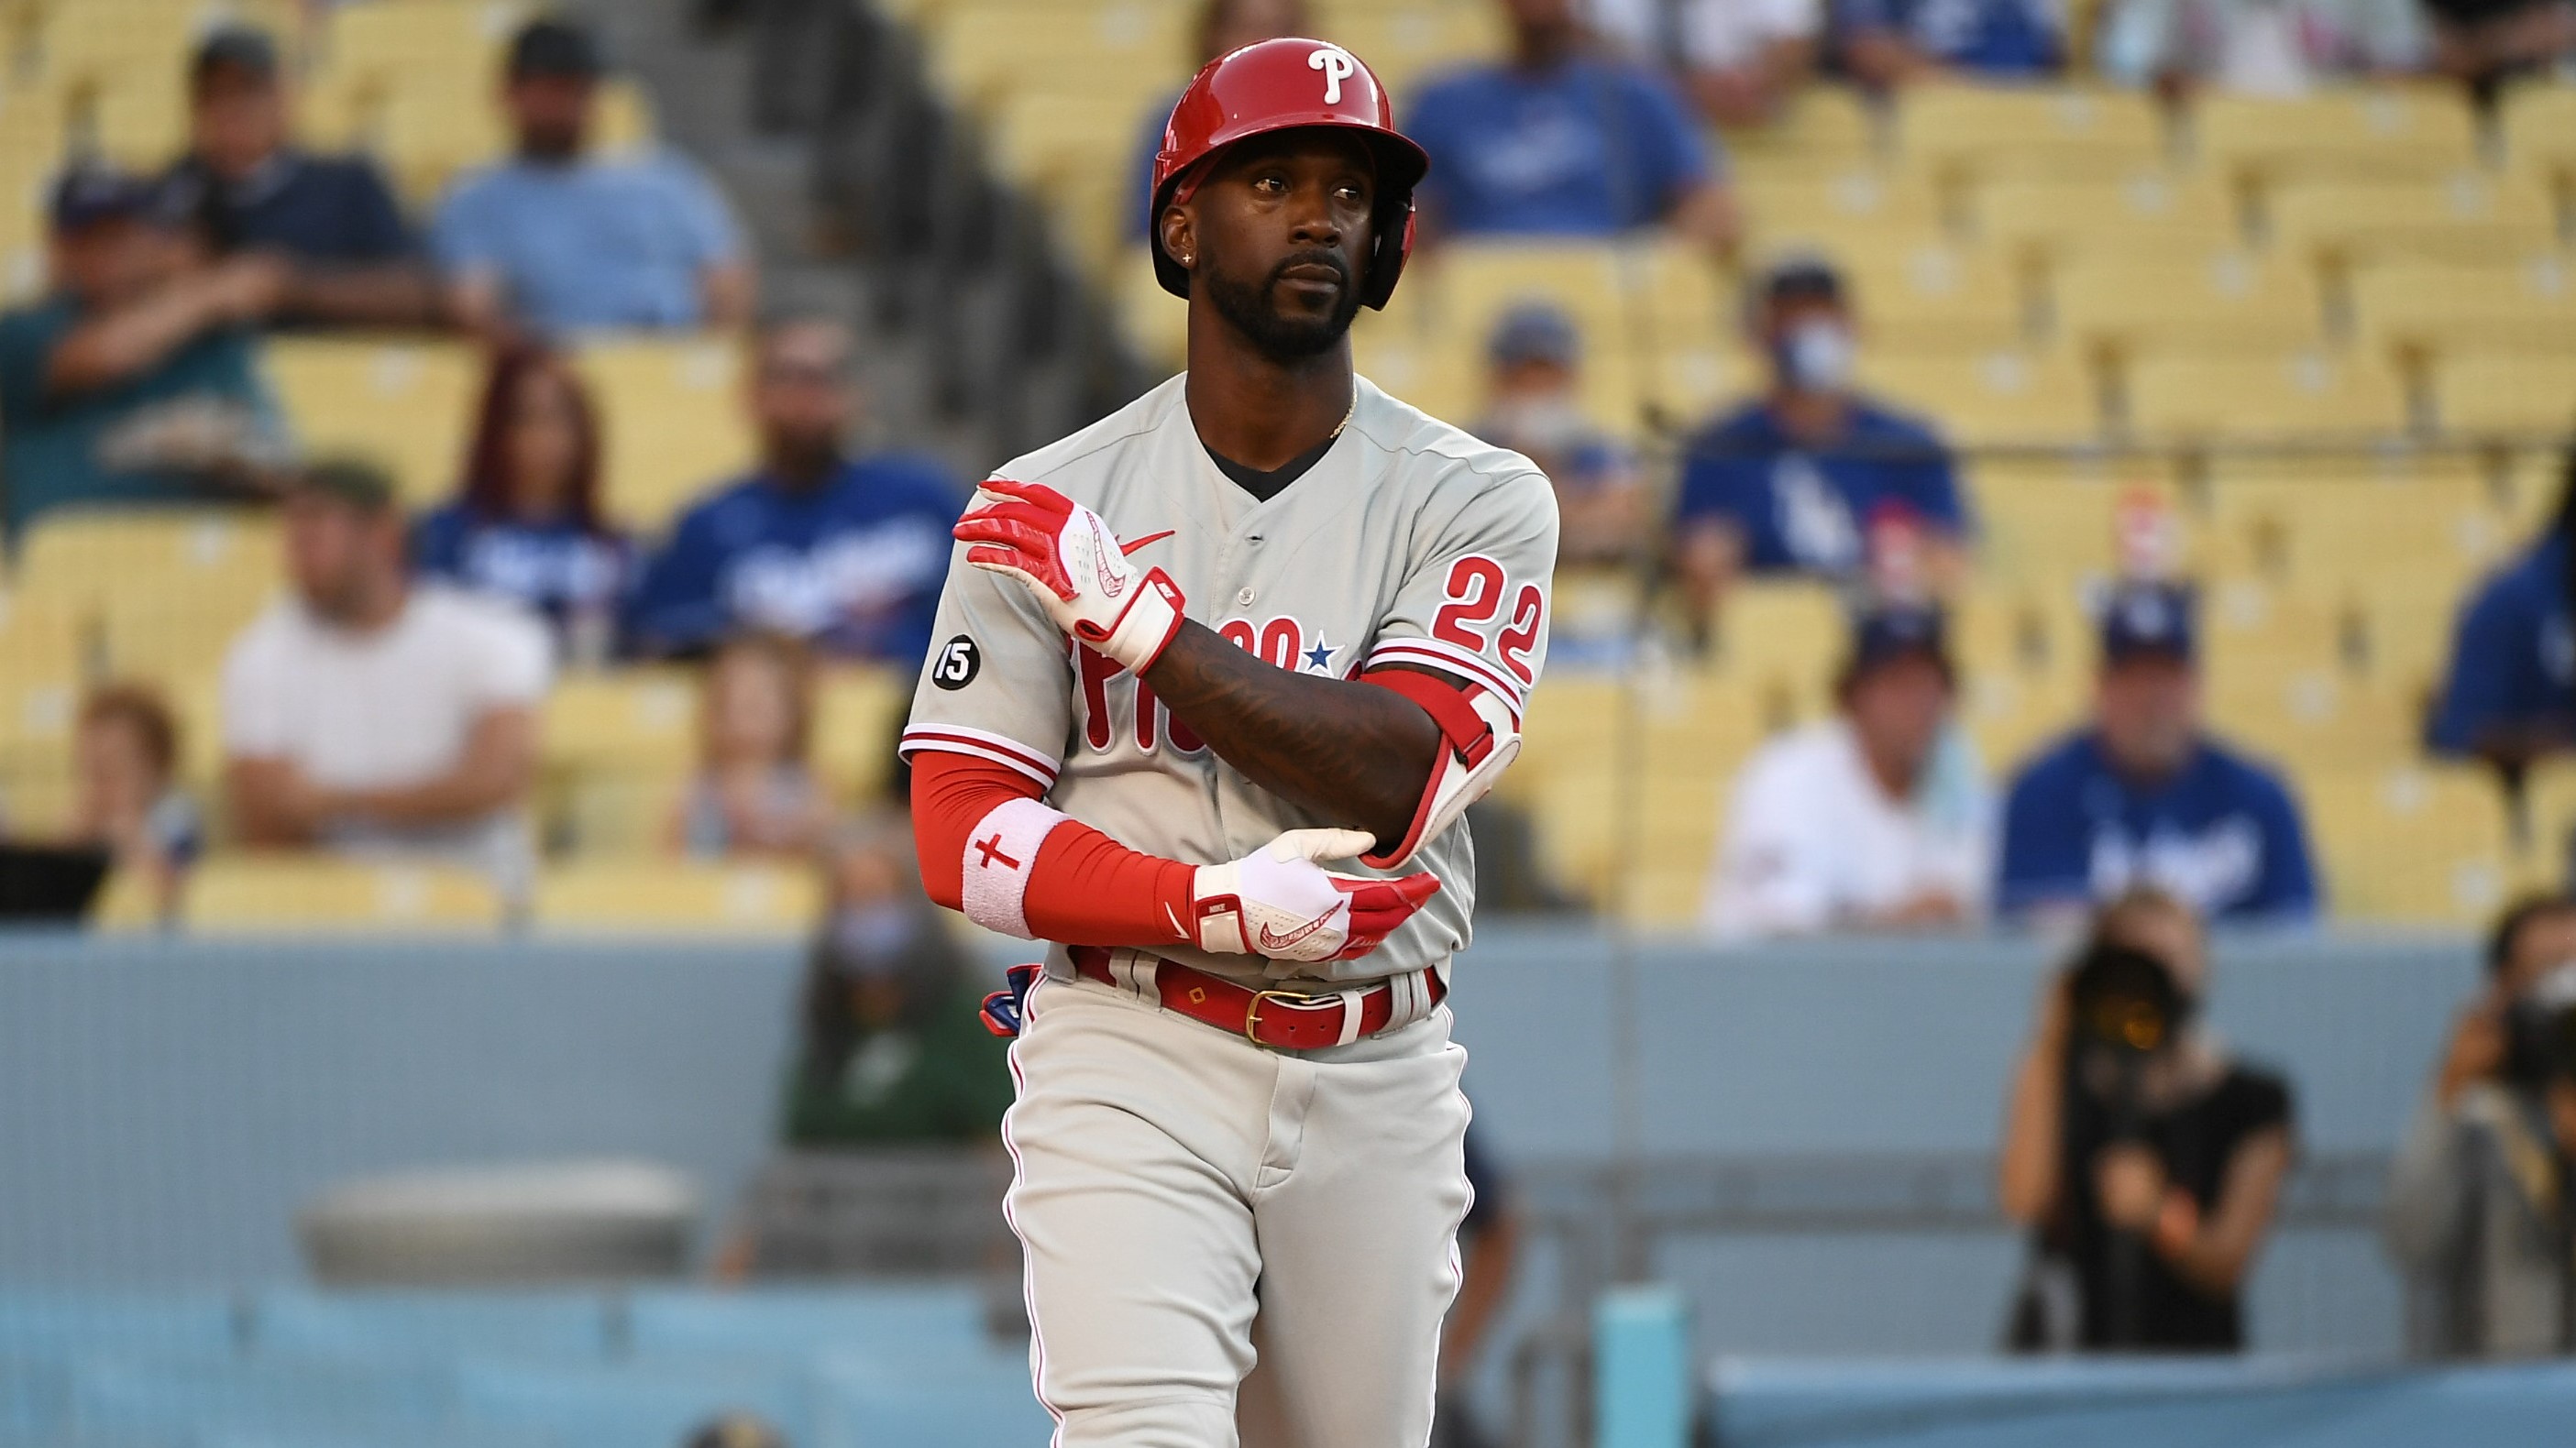 Phillies to wear red alternate jerseys twice this week